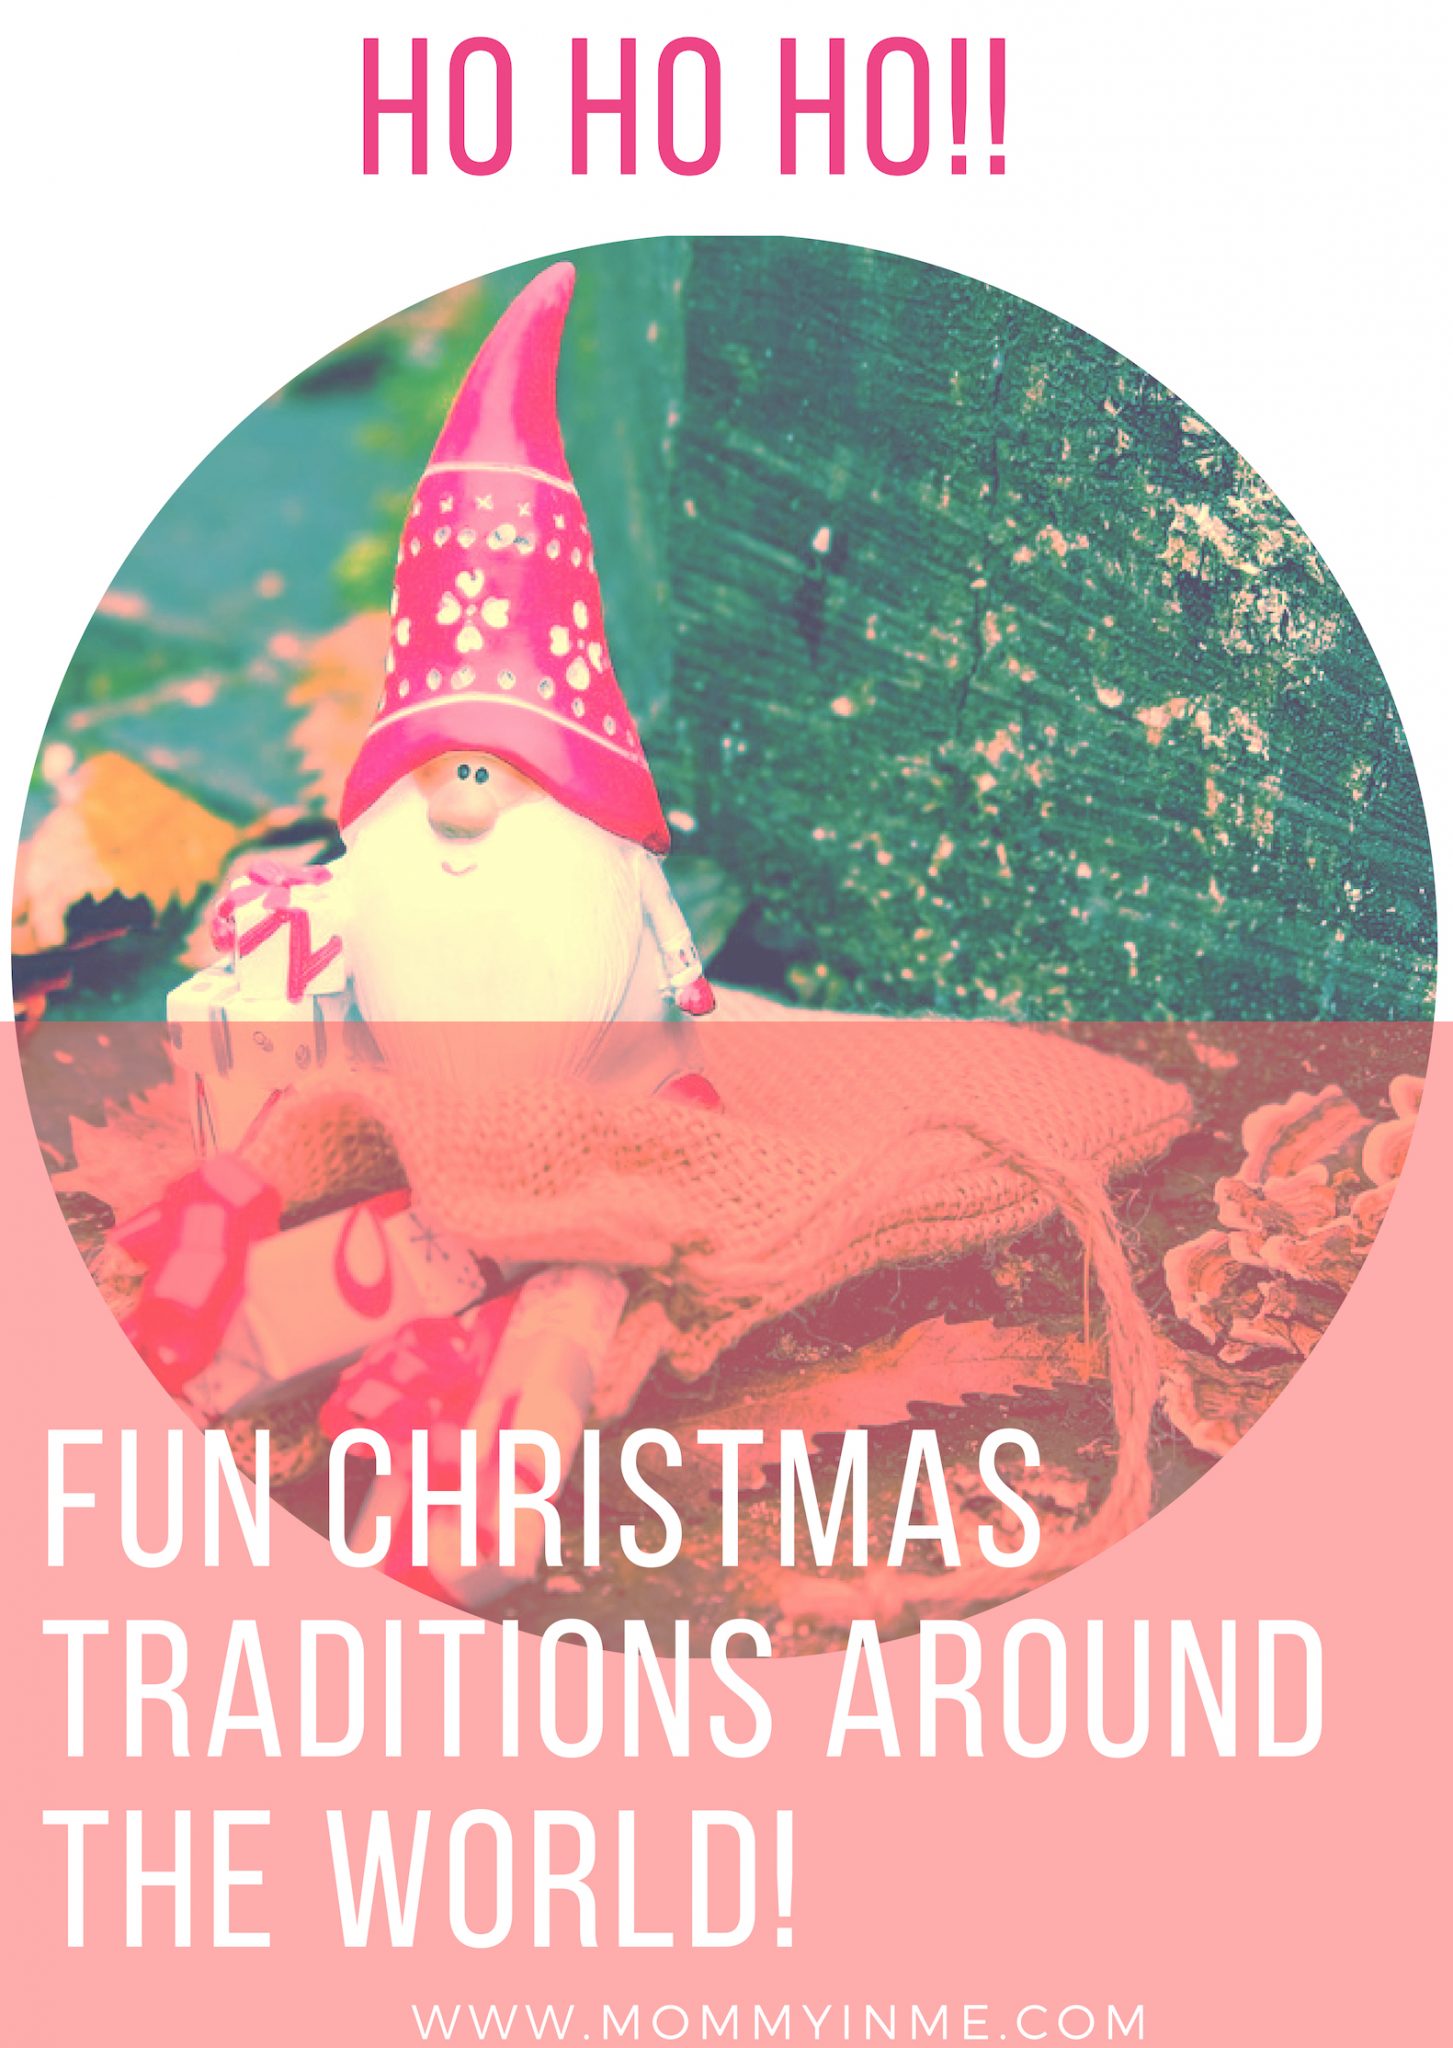 Christmas is coming, one of the festival celebrated across the world. But the stories around the world are quite gripping and fun. Its not the loving Santa Claus Always. Read 5 most funny and unique Christmas traditions around the world. #christmas #christmasiscoming #christmastraditions #canada #santaclaus #folklores #stories #mummering